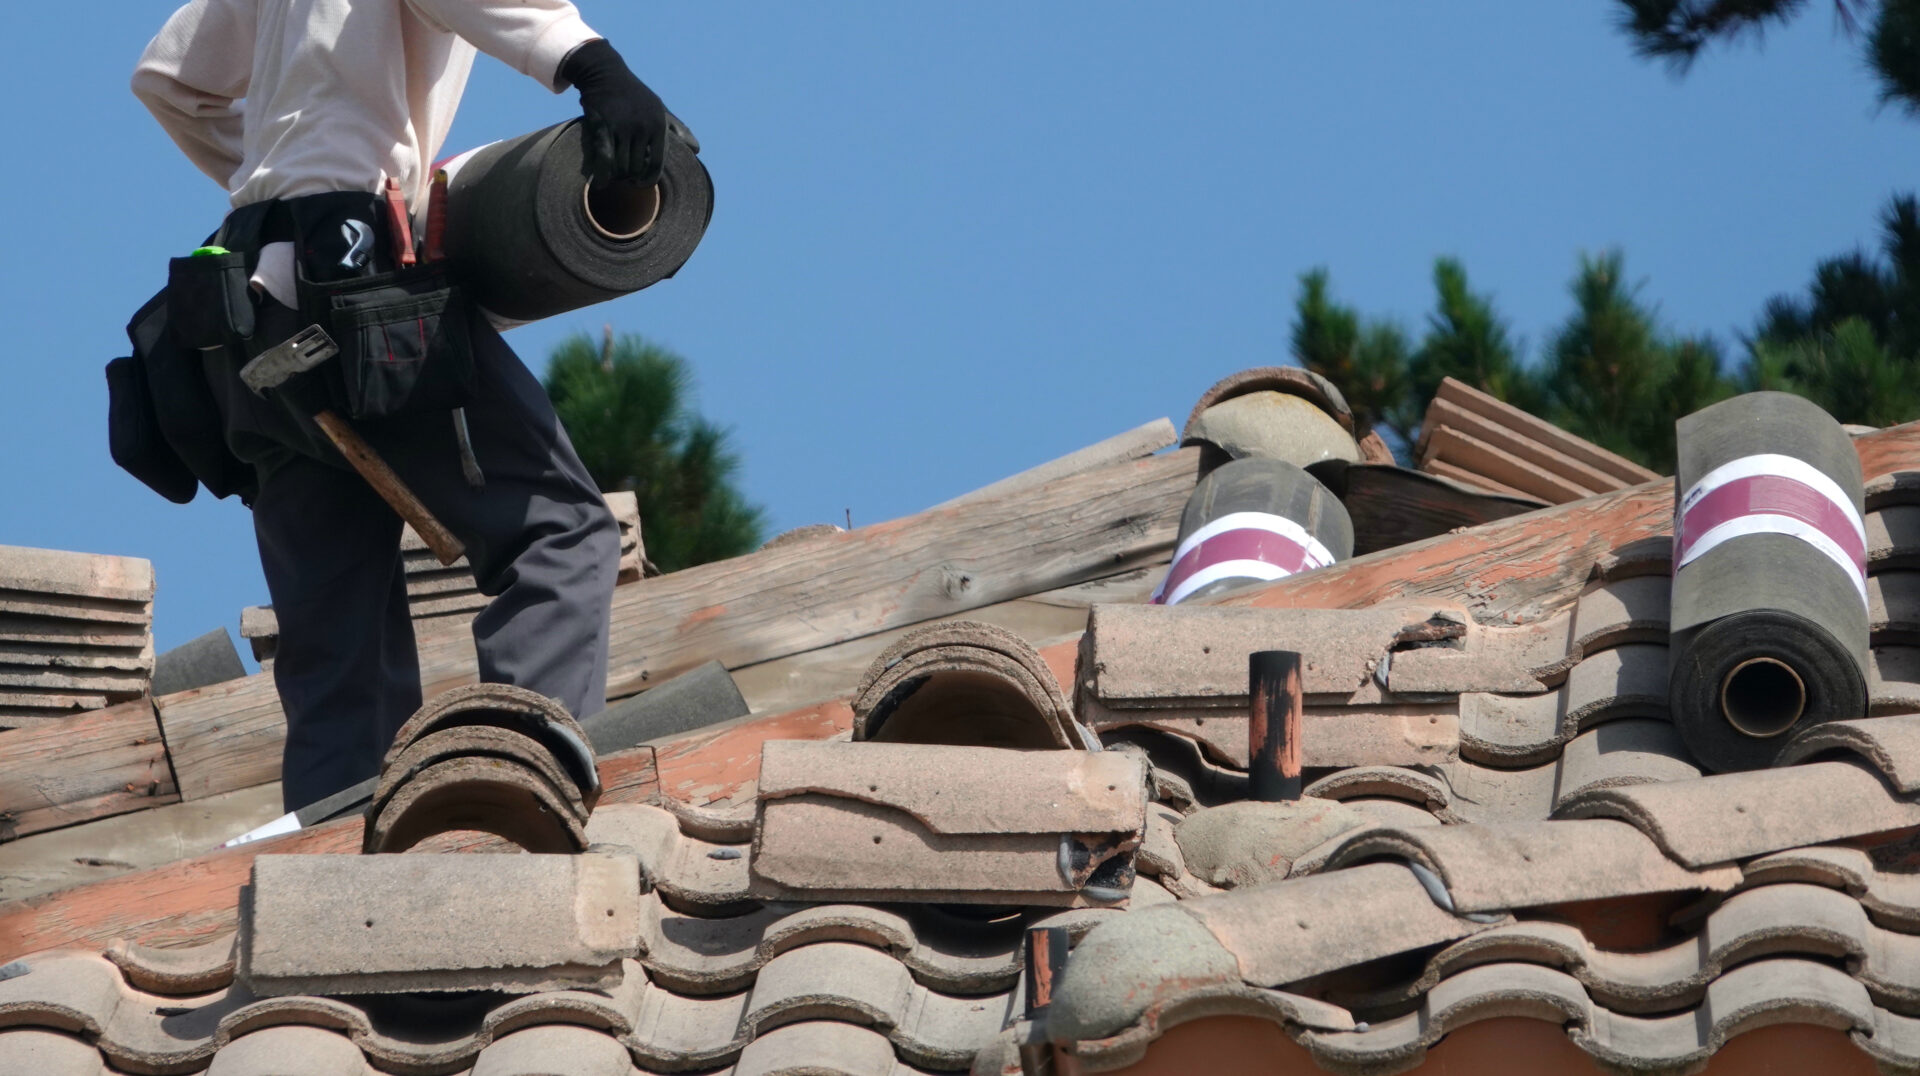 Roofer carries roofing material across a roof under repair